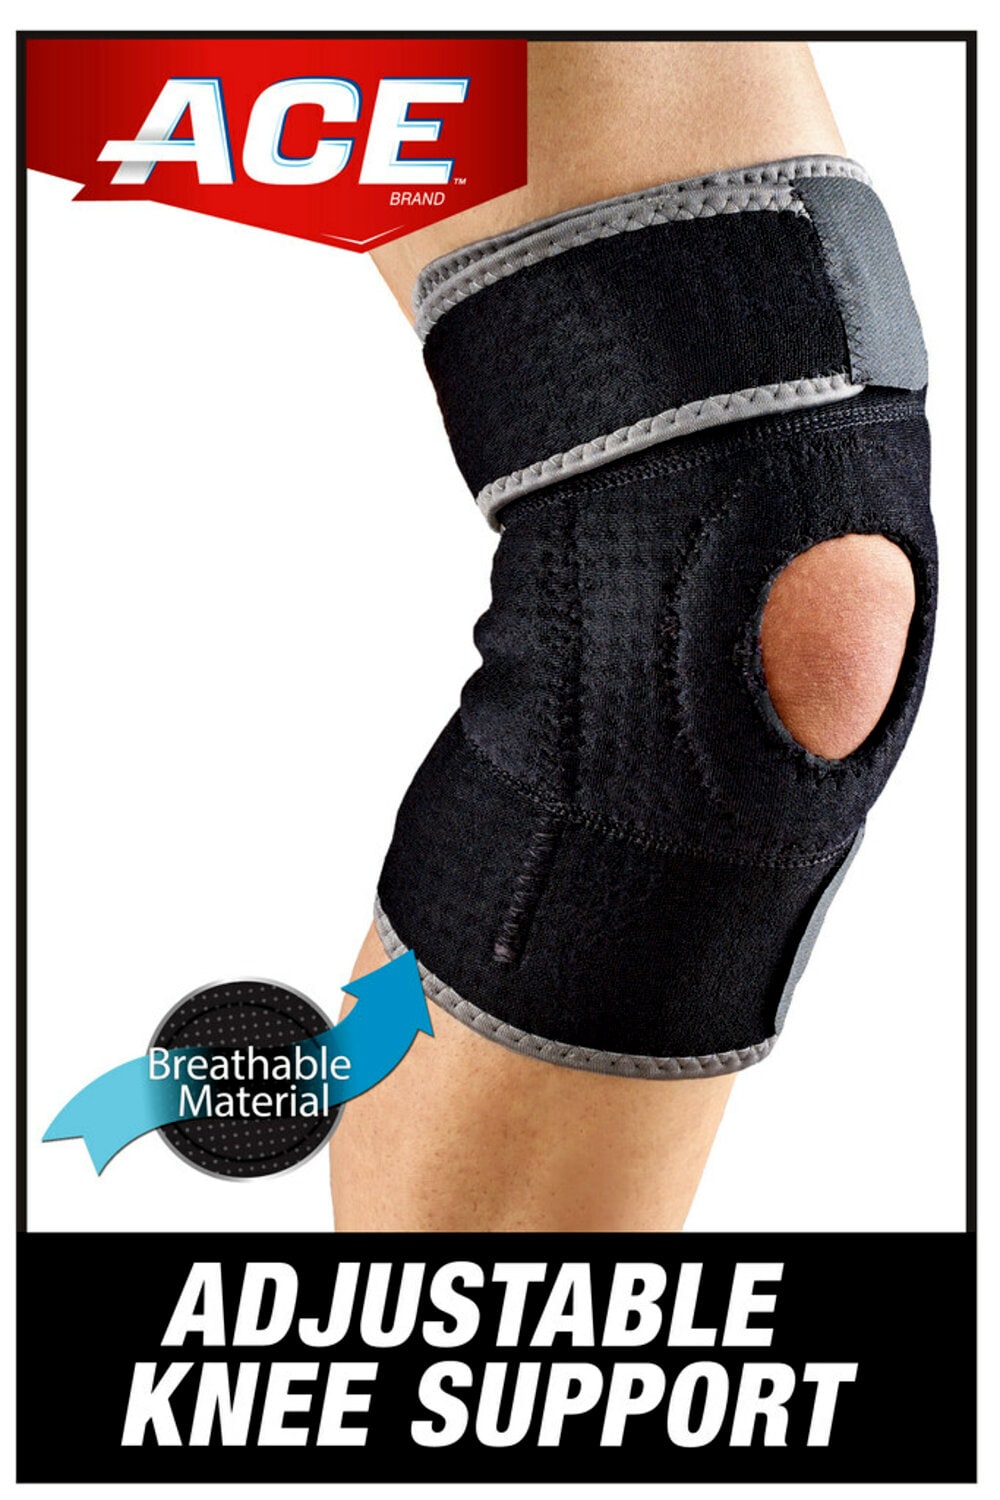 7100259143 - ACE Knee Support 207247-4, One Size Adjustable